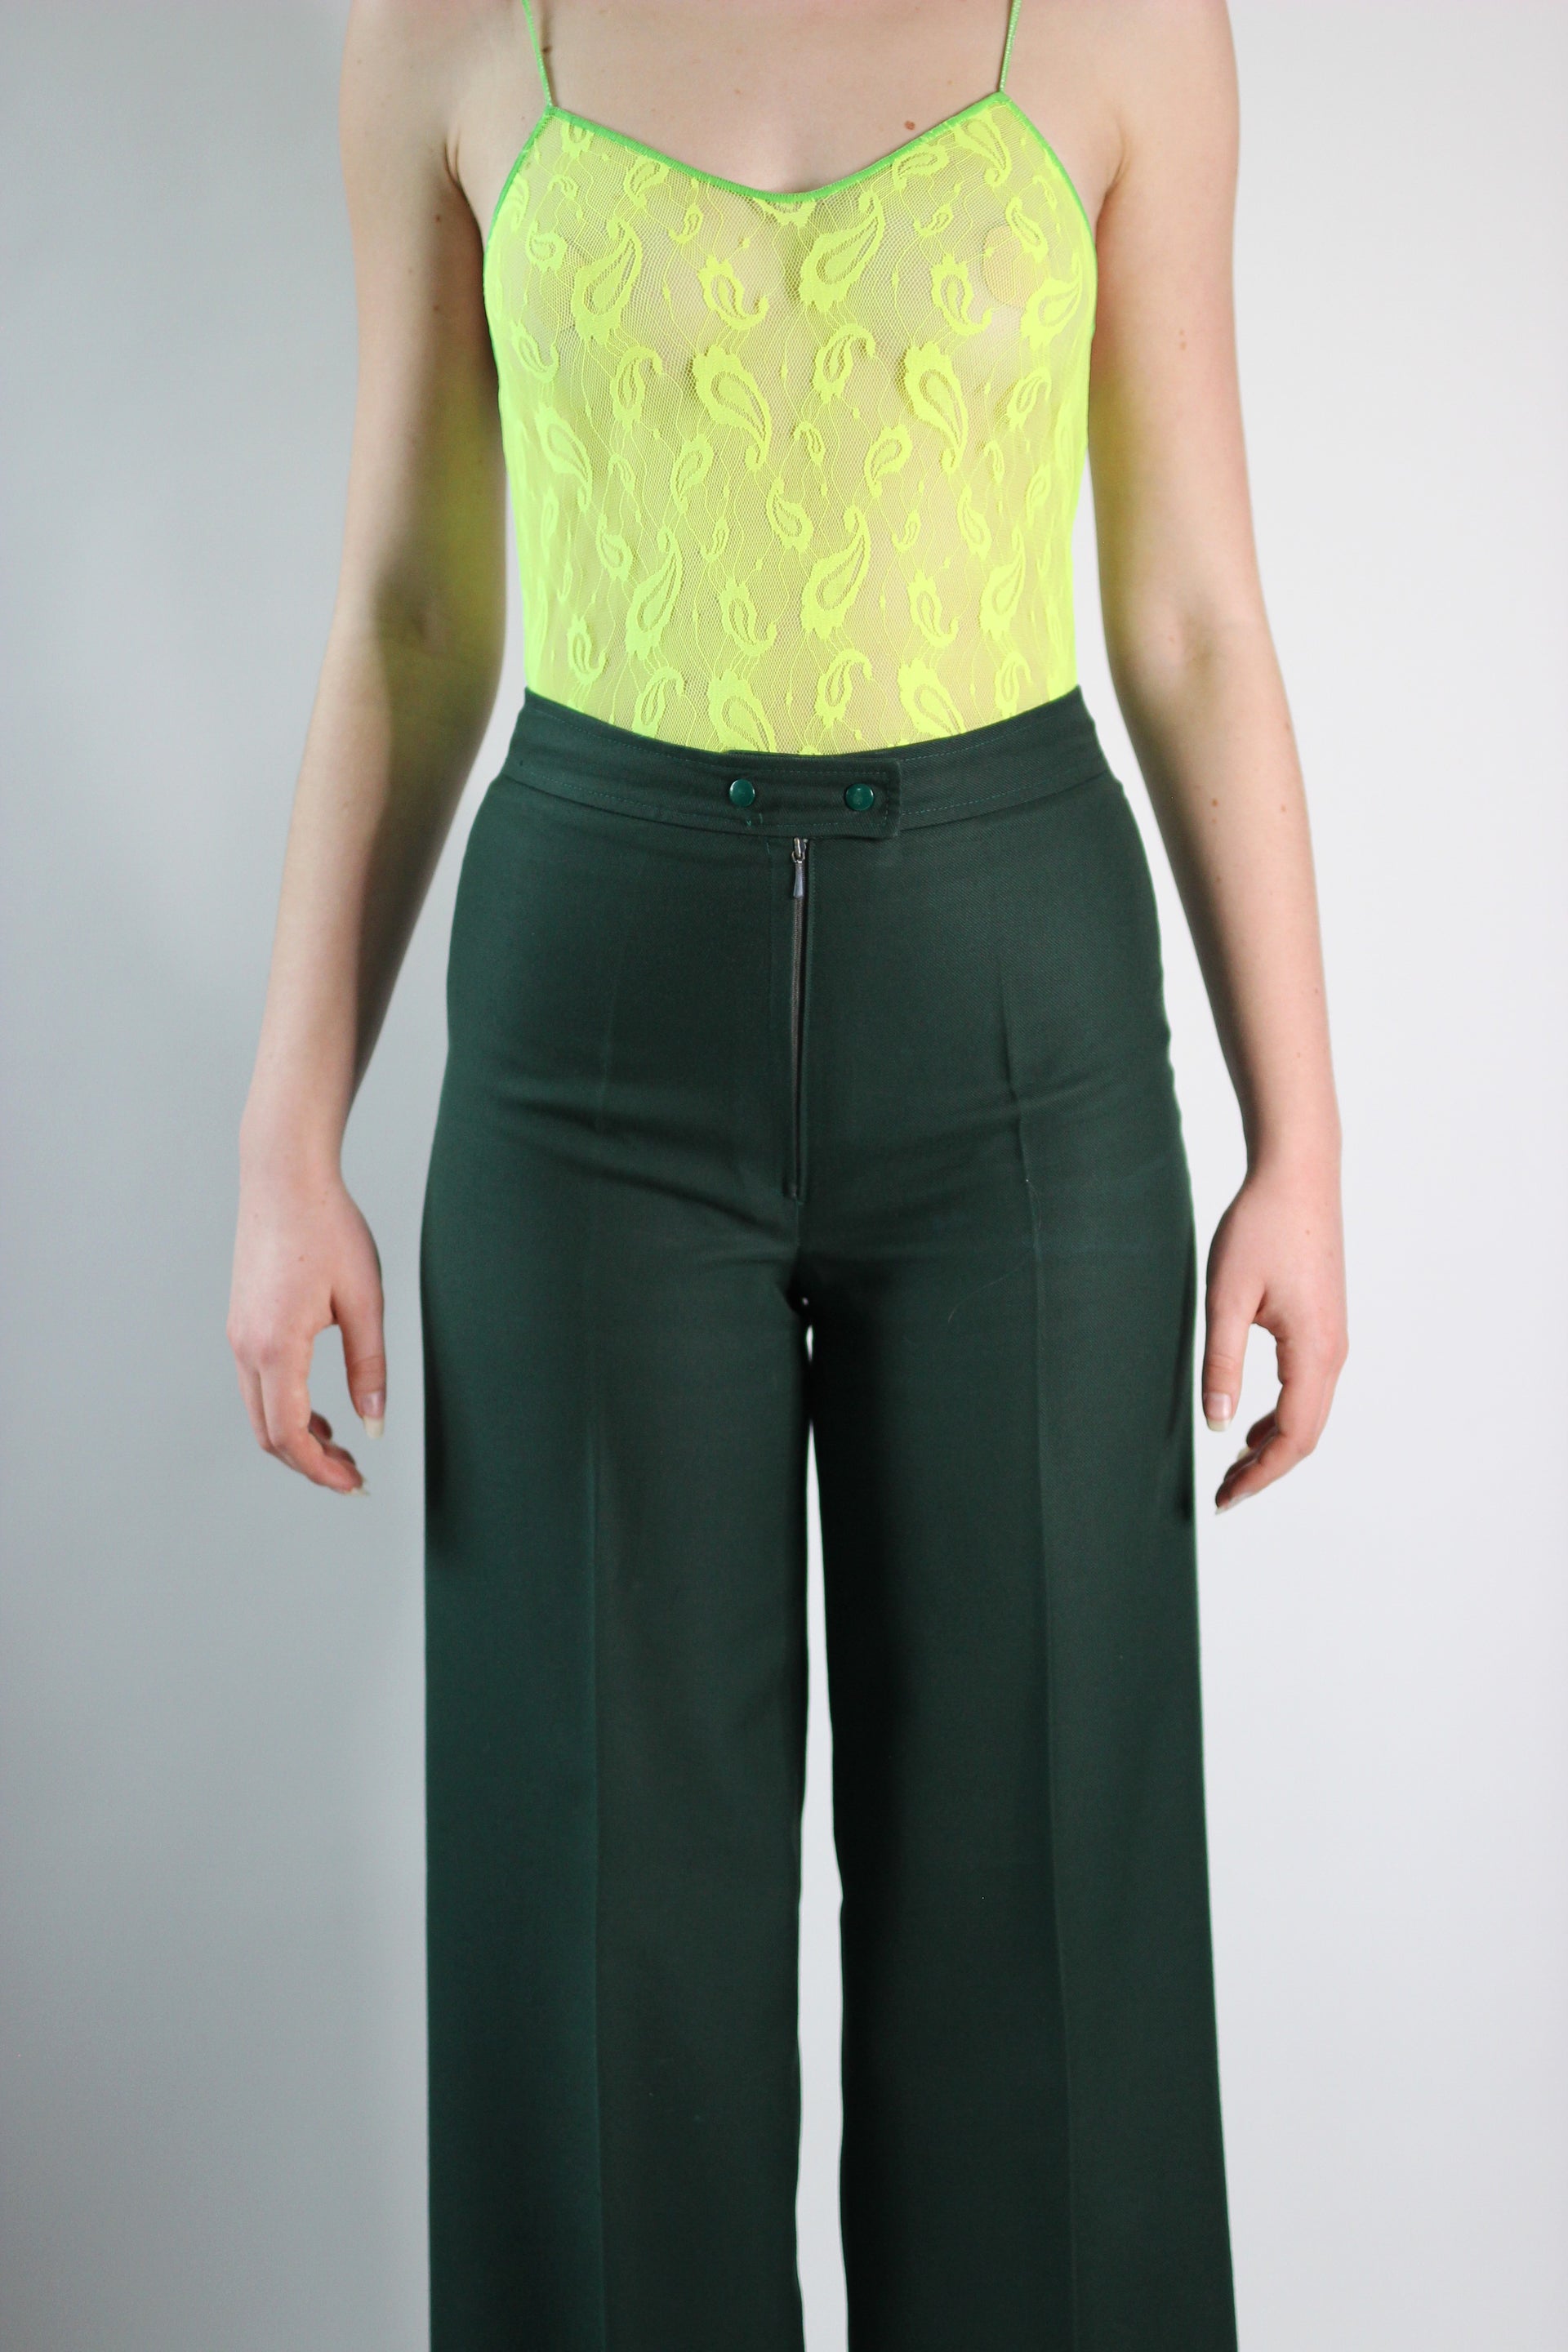 1970s Dark Green High Waisted Flare Pants// Size M